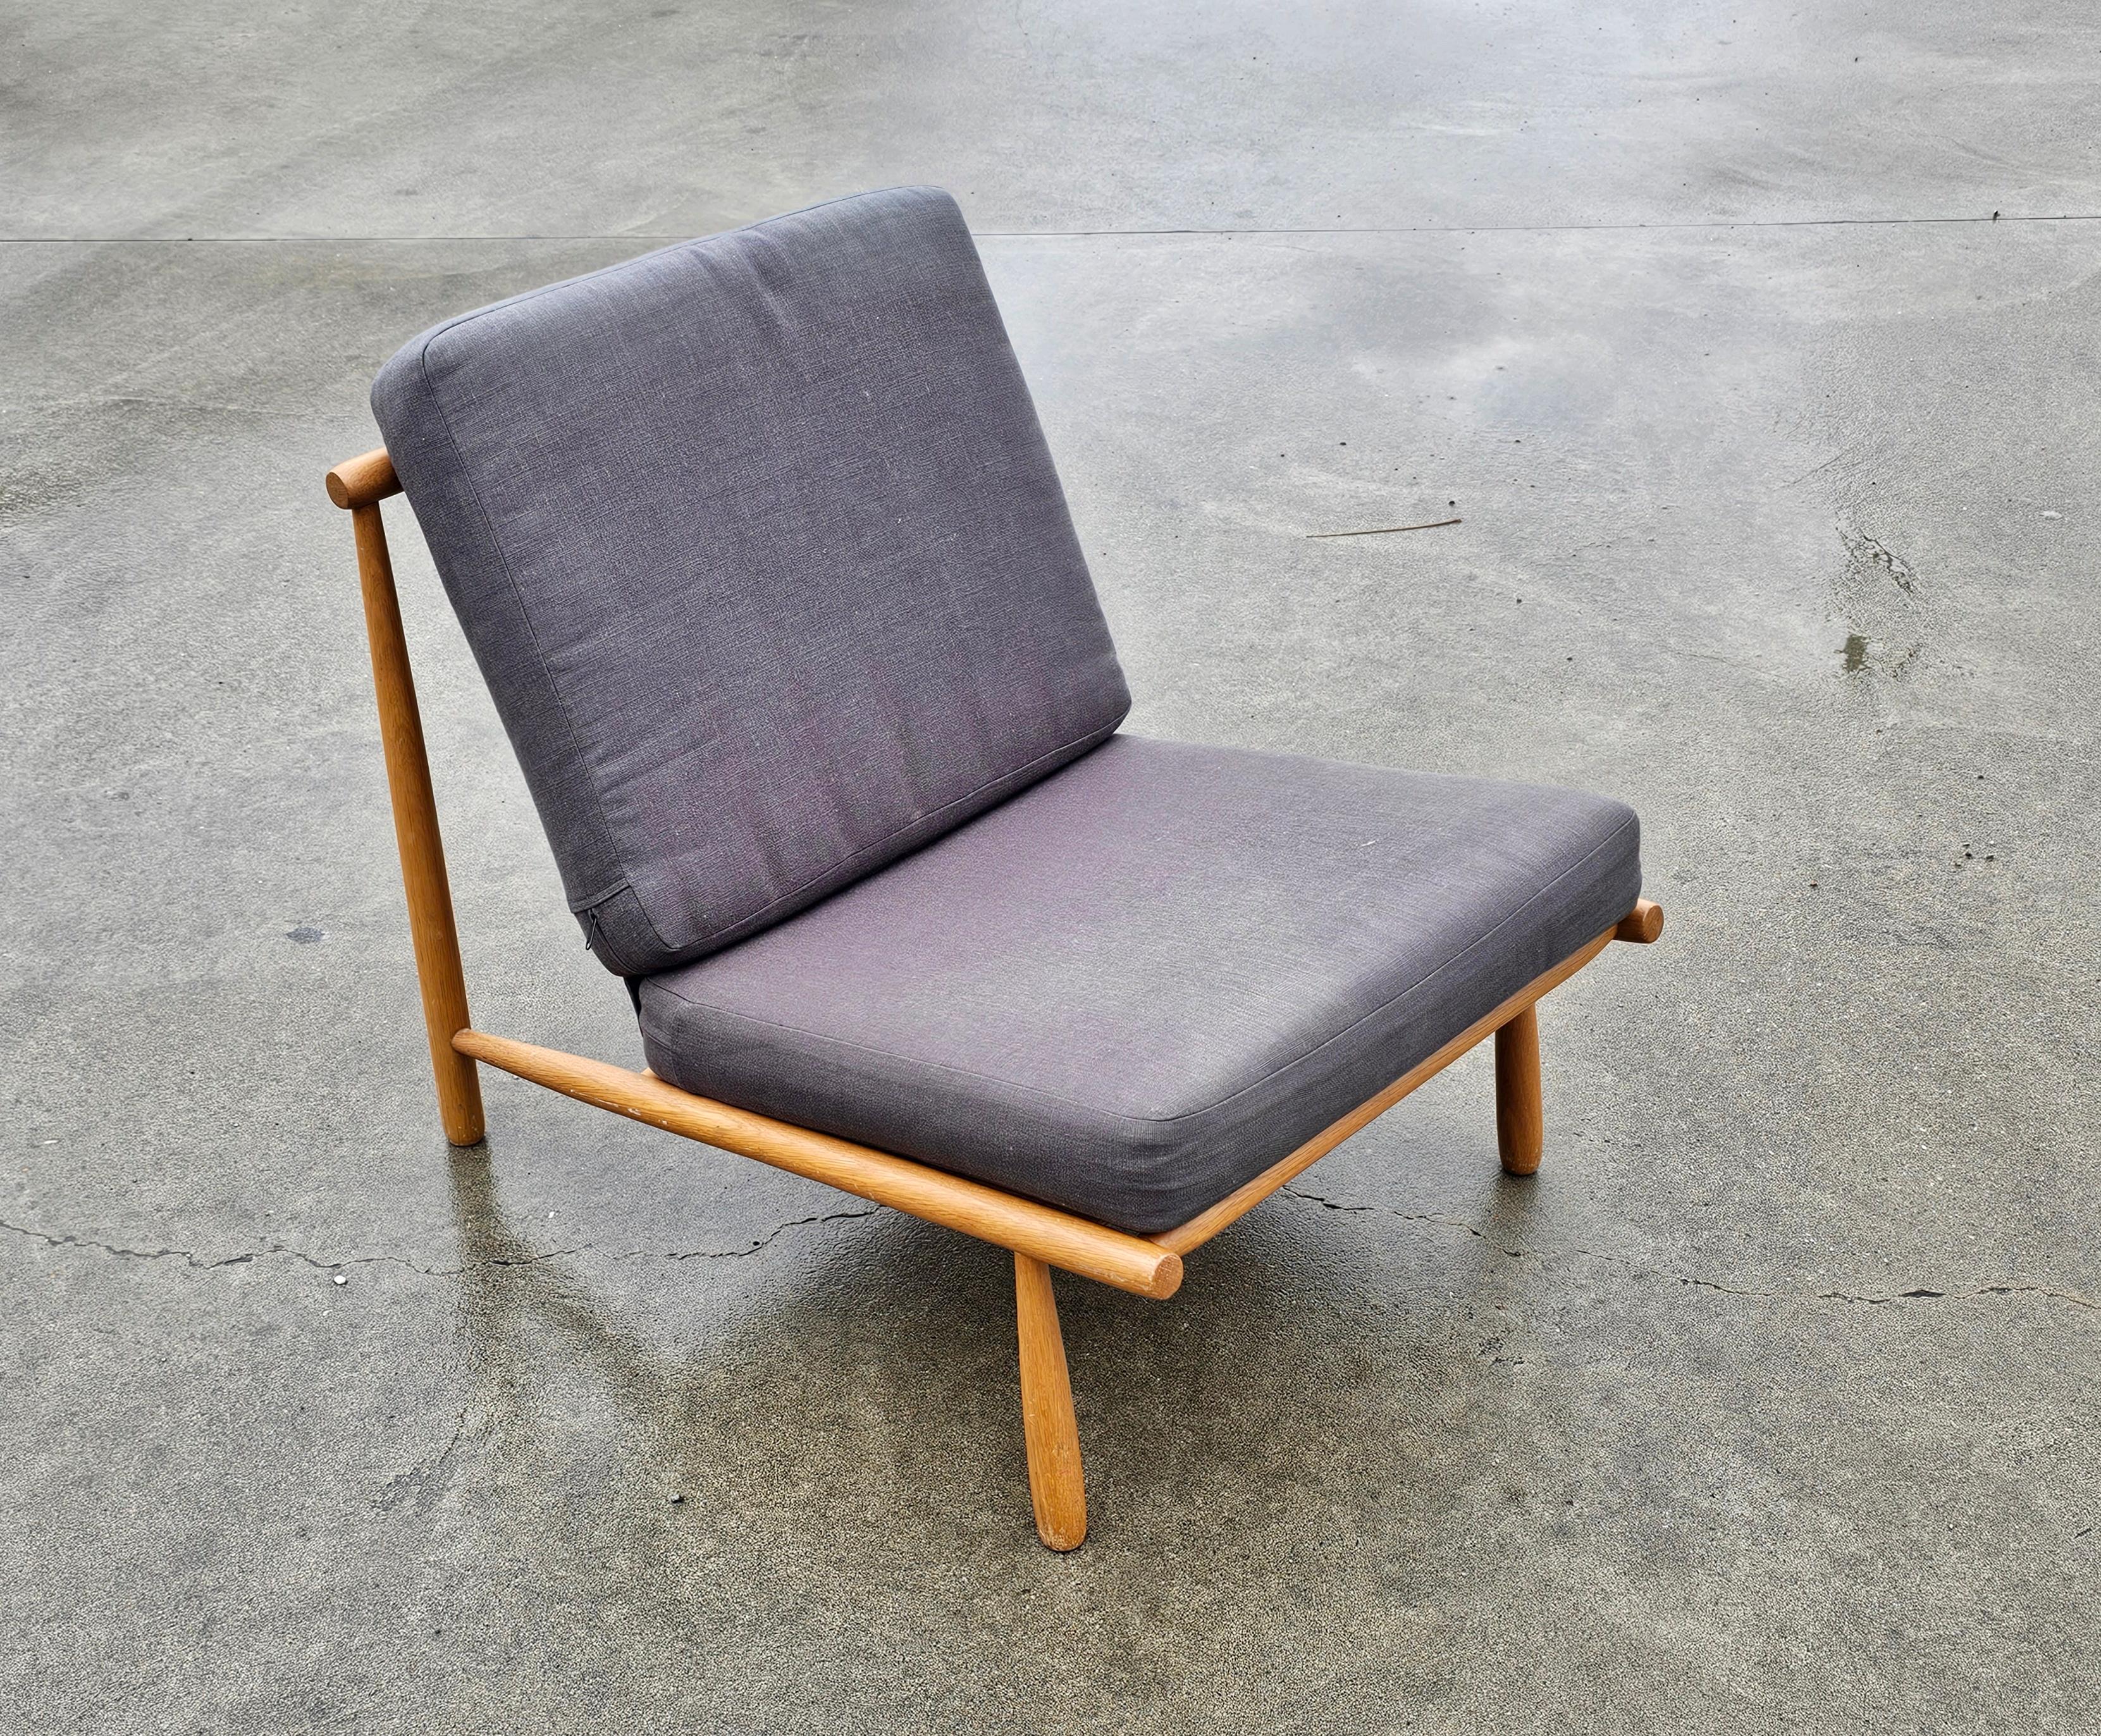 Pair of Domus Lounge Chairs by Alf Svensson for Dux Sweden, Sweden 1960s For Sale 2